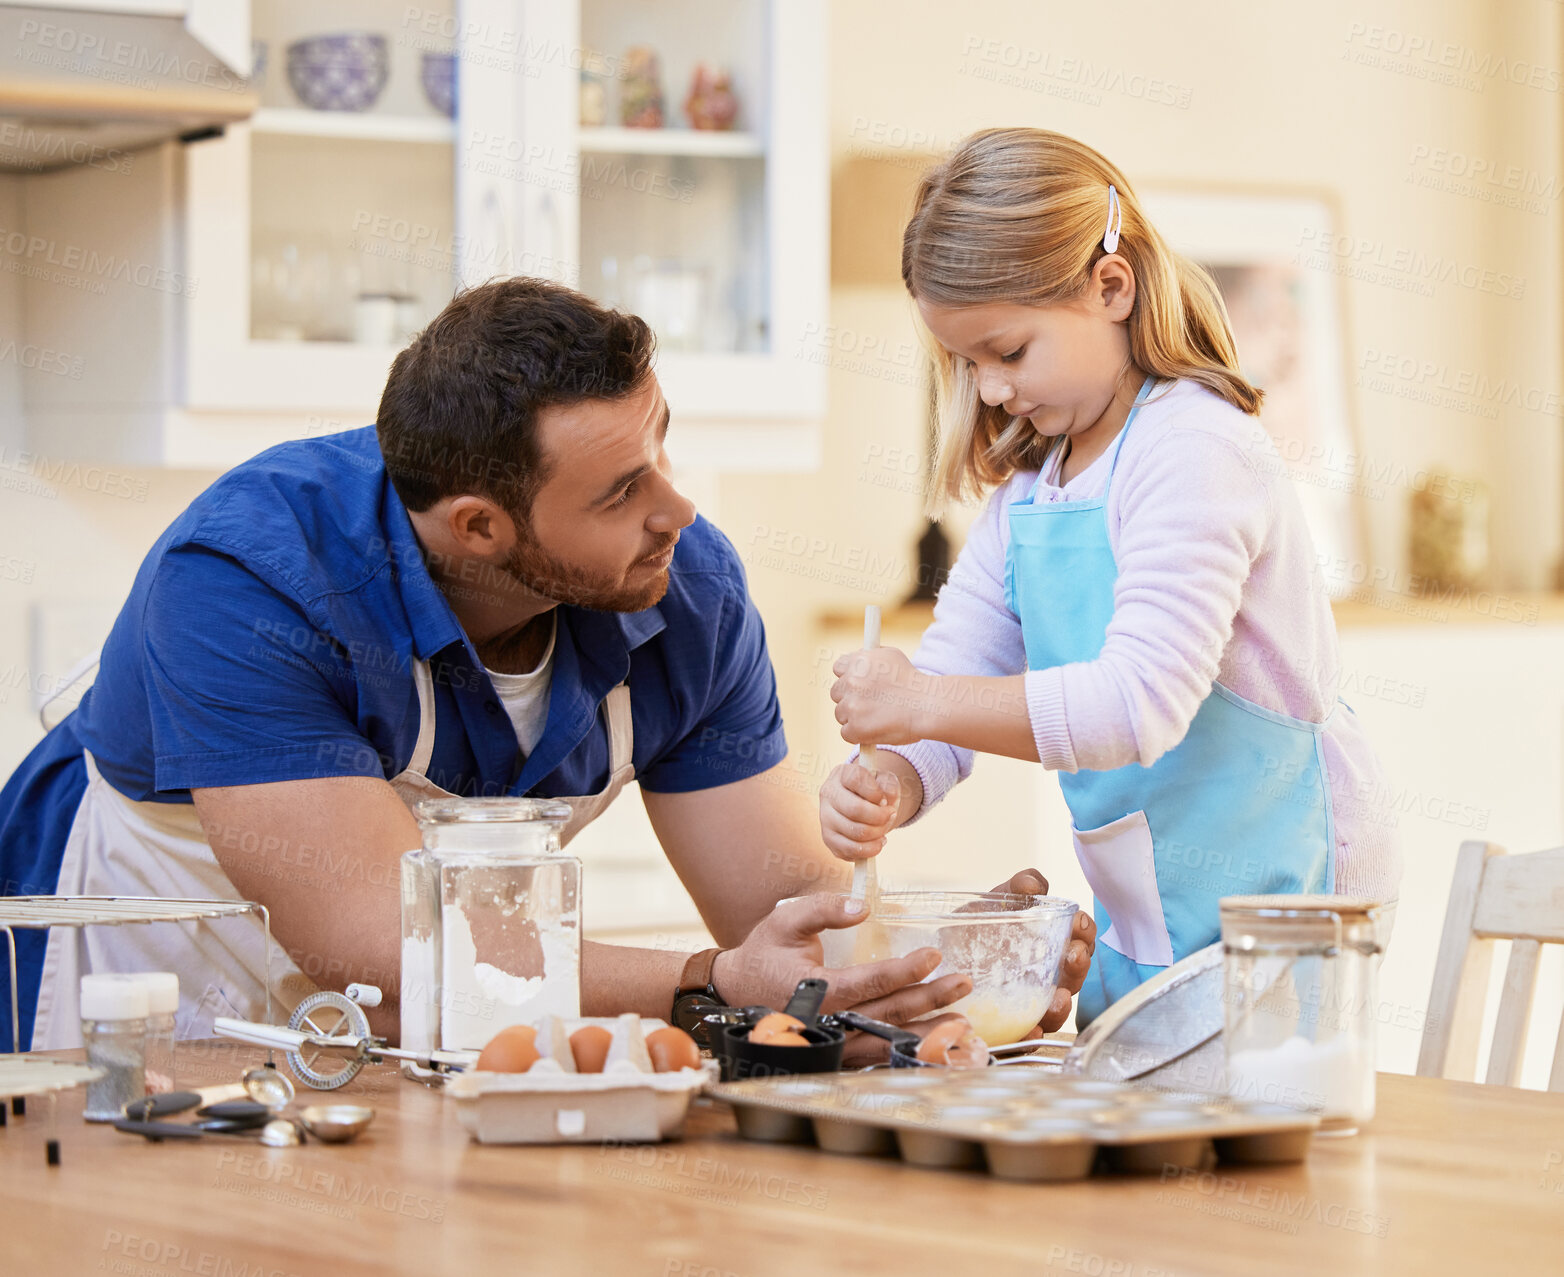 Buy stock photo Shot of a young man helping his daughter stir a bowl of cake batter